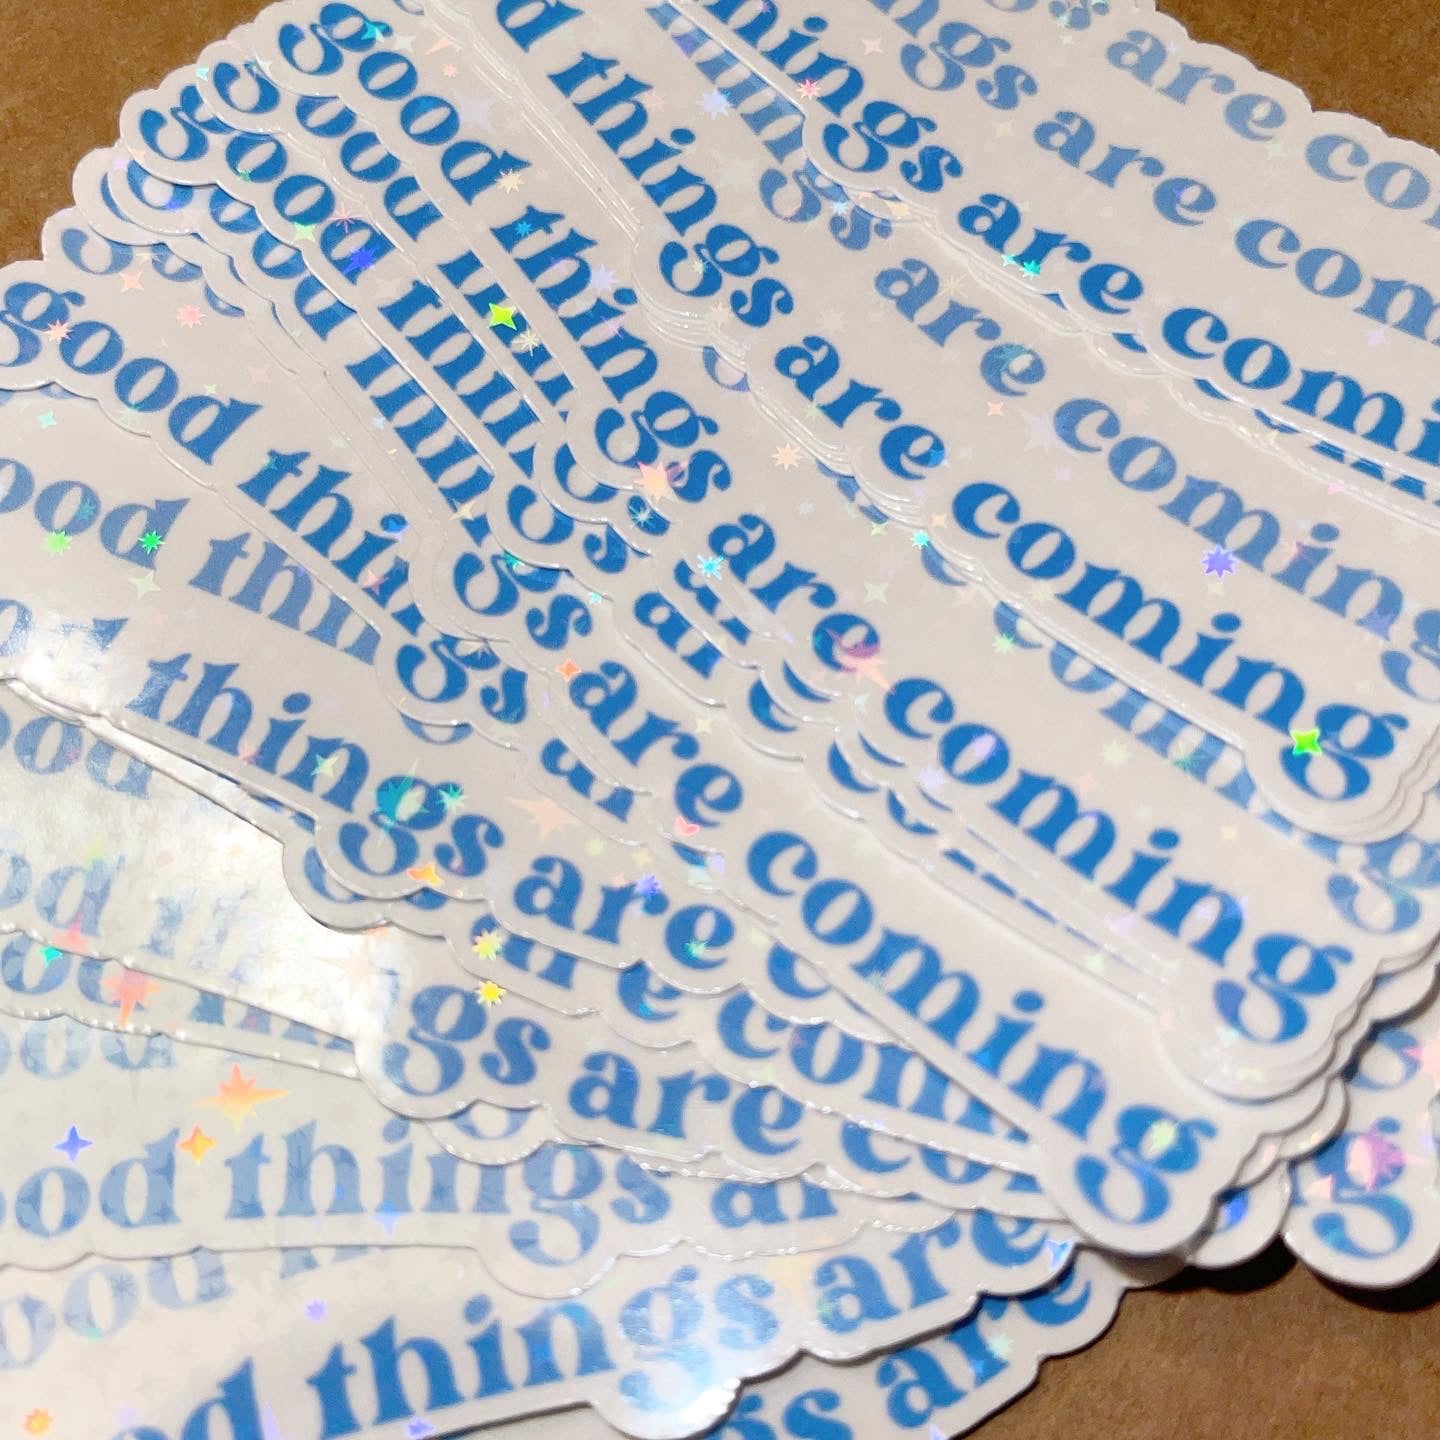 Good things are coming sticker holographic